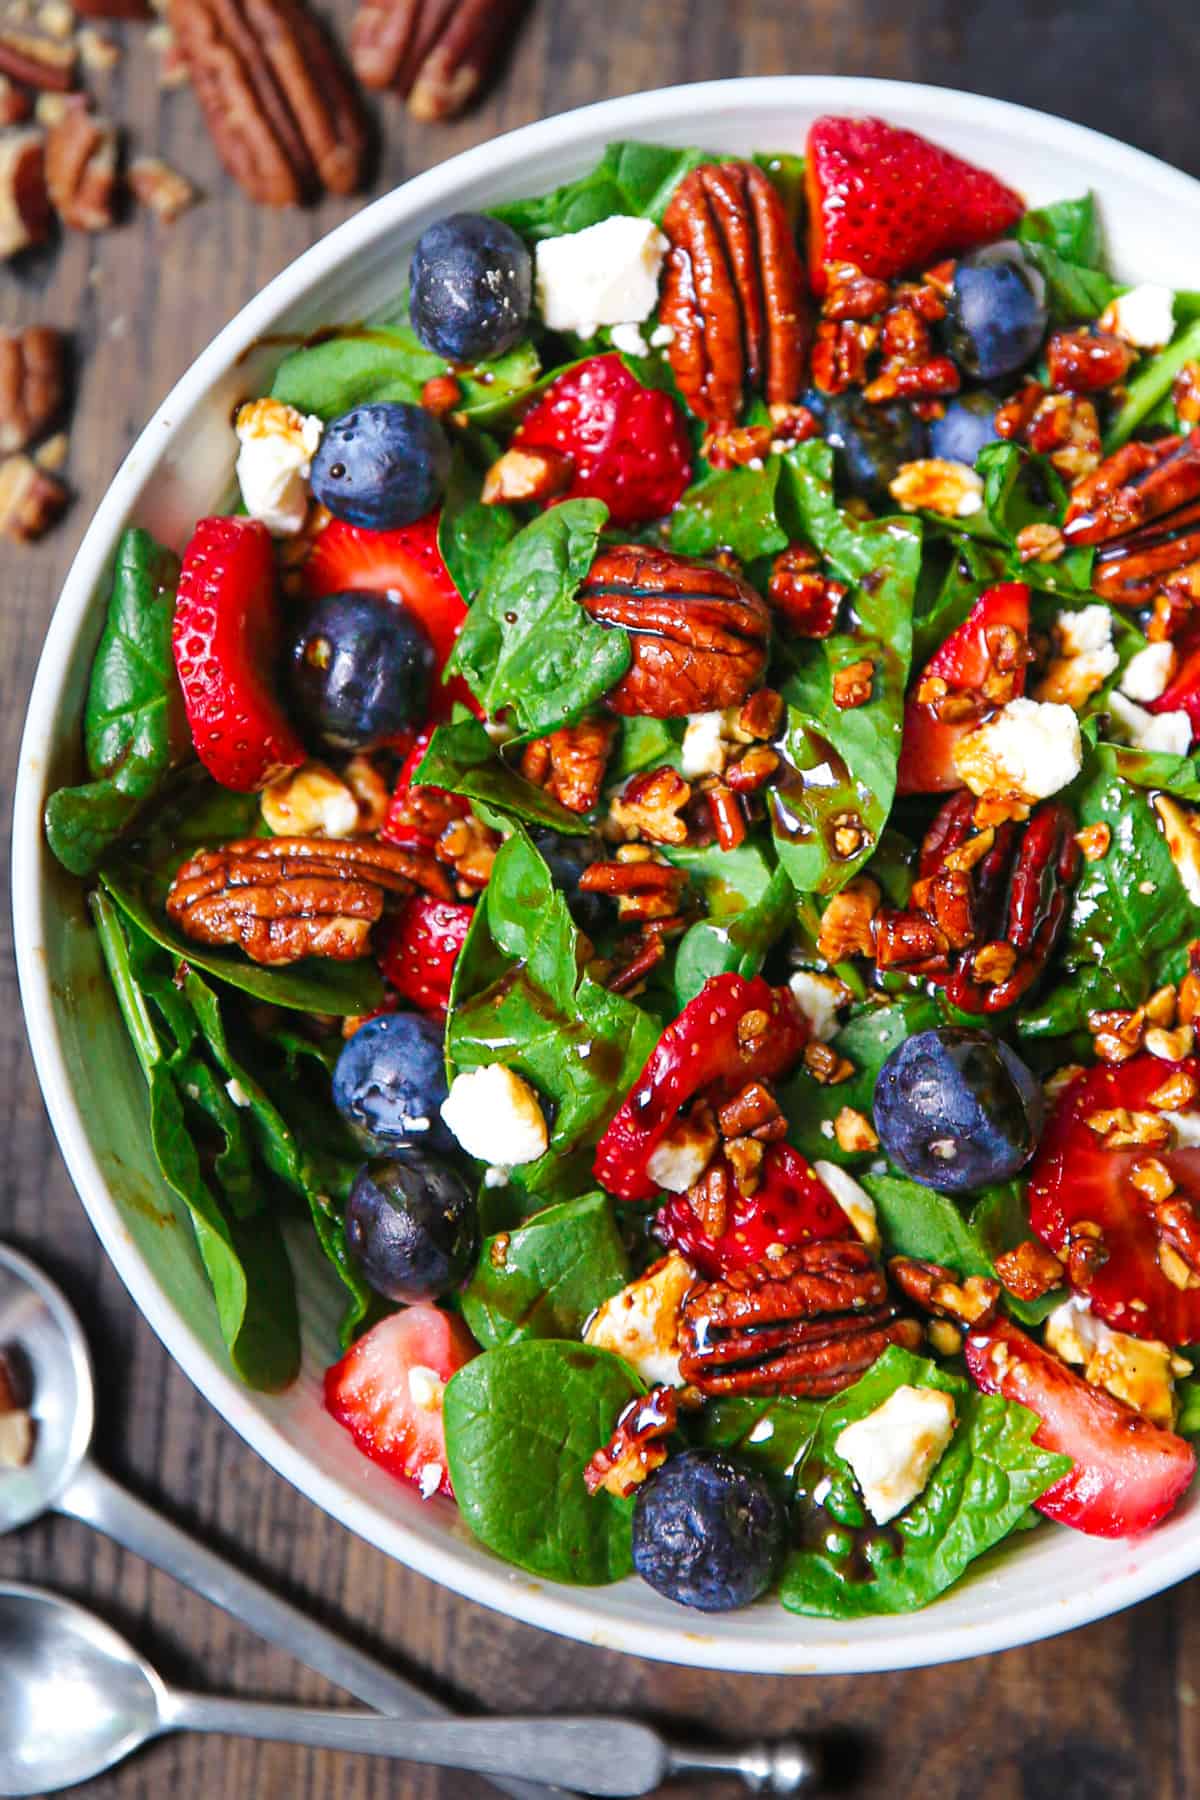 strawberry spinach salad with pecans, feta cheese, and balsamic salad dressing